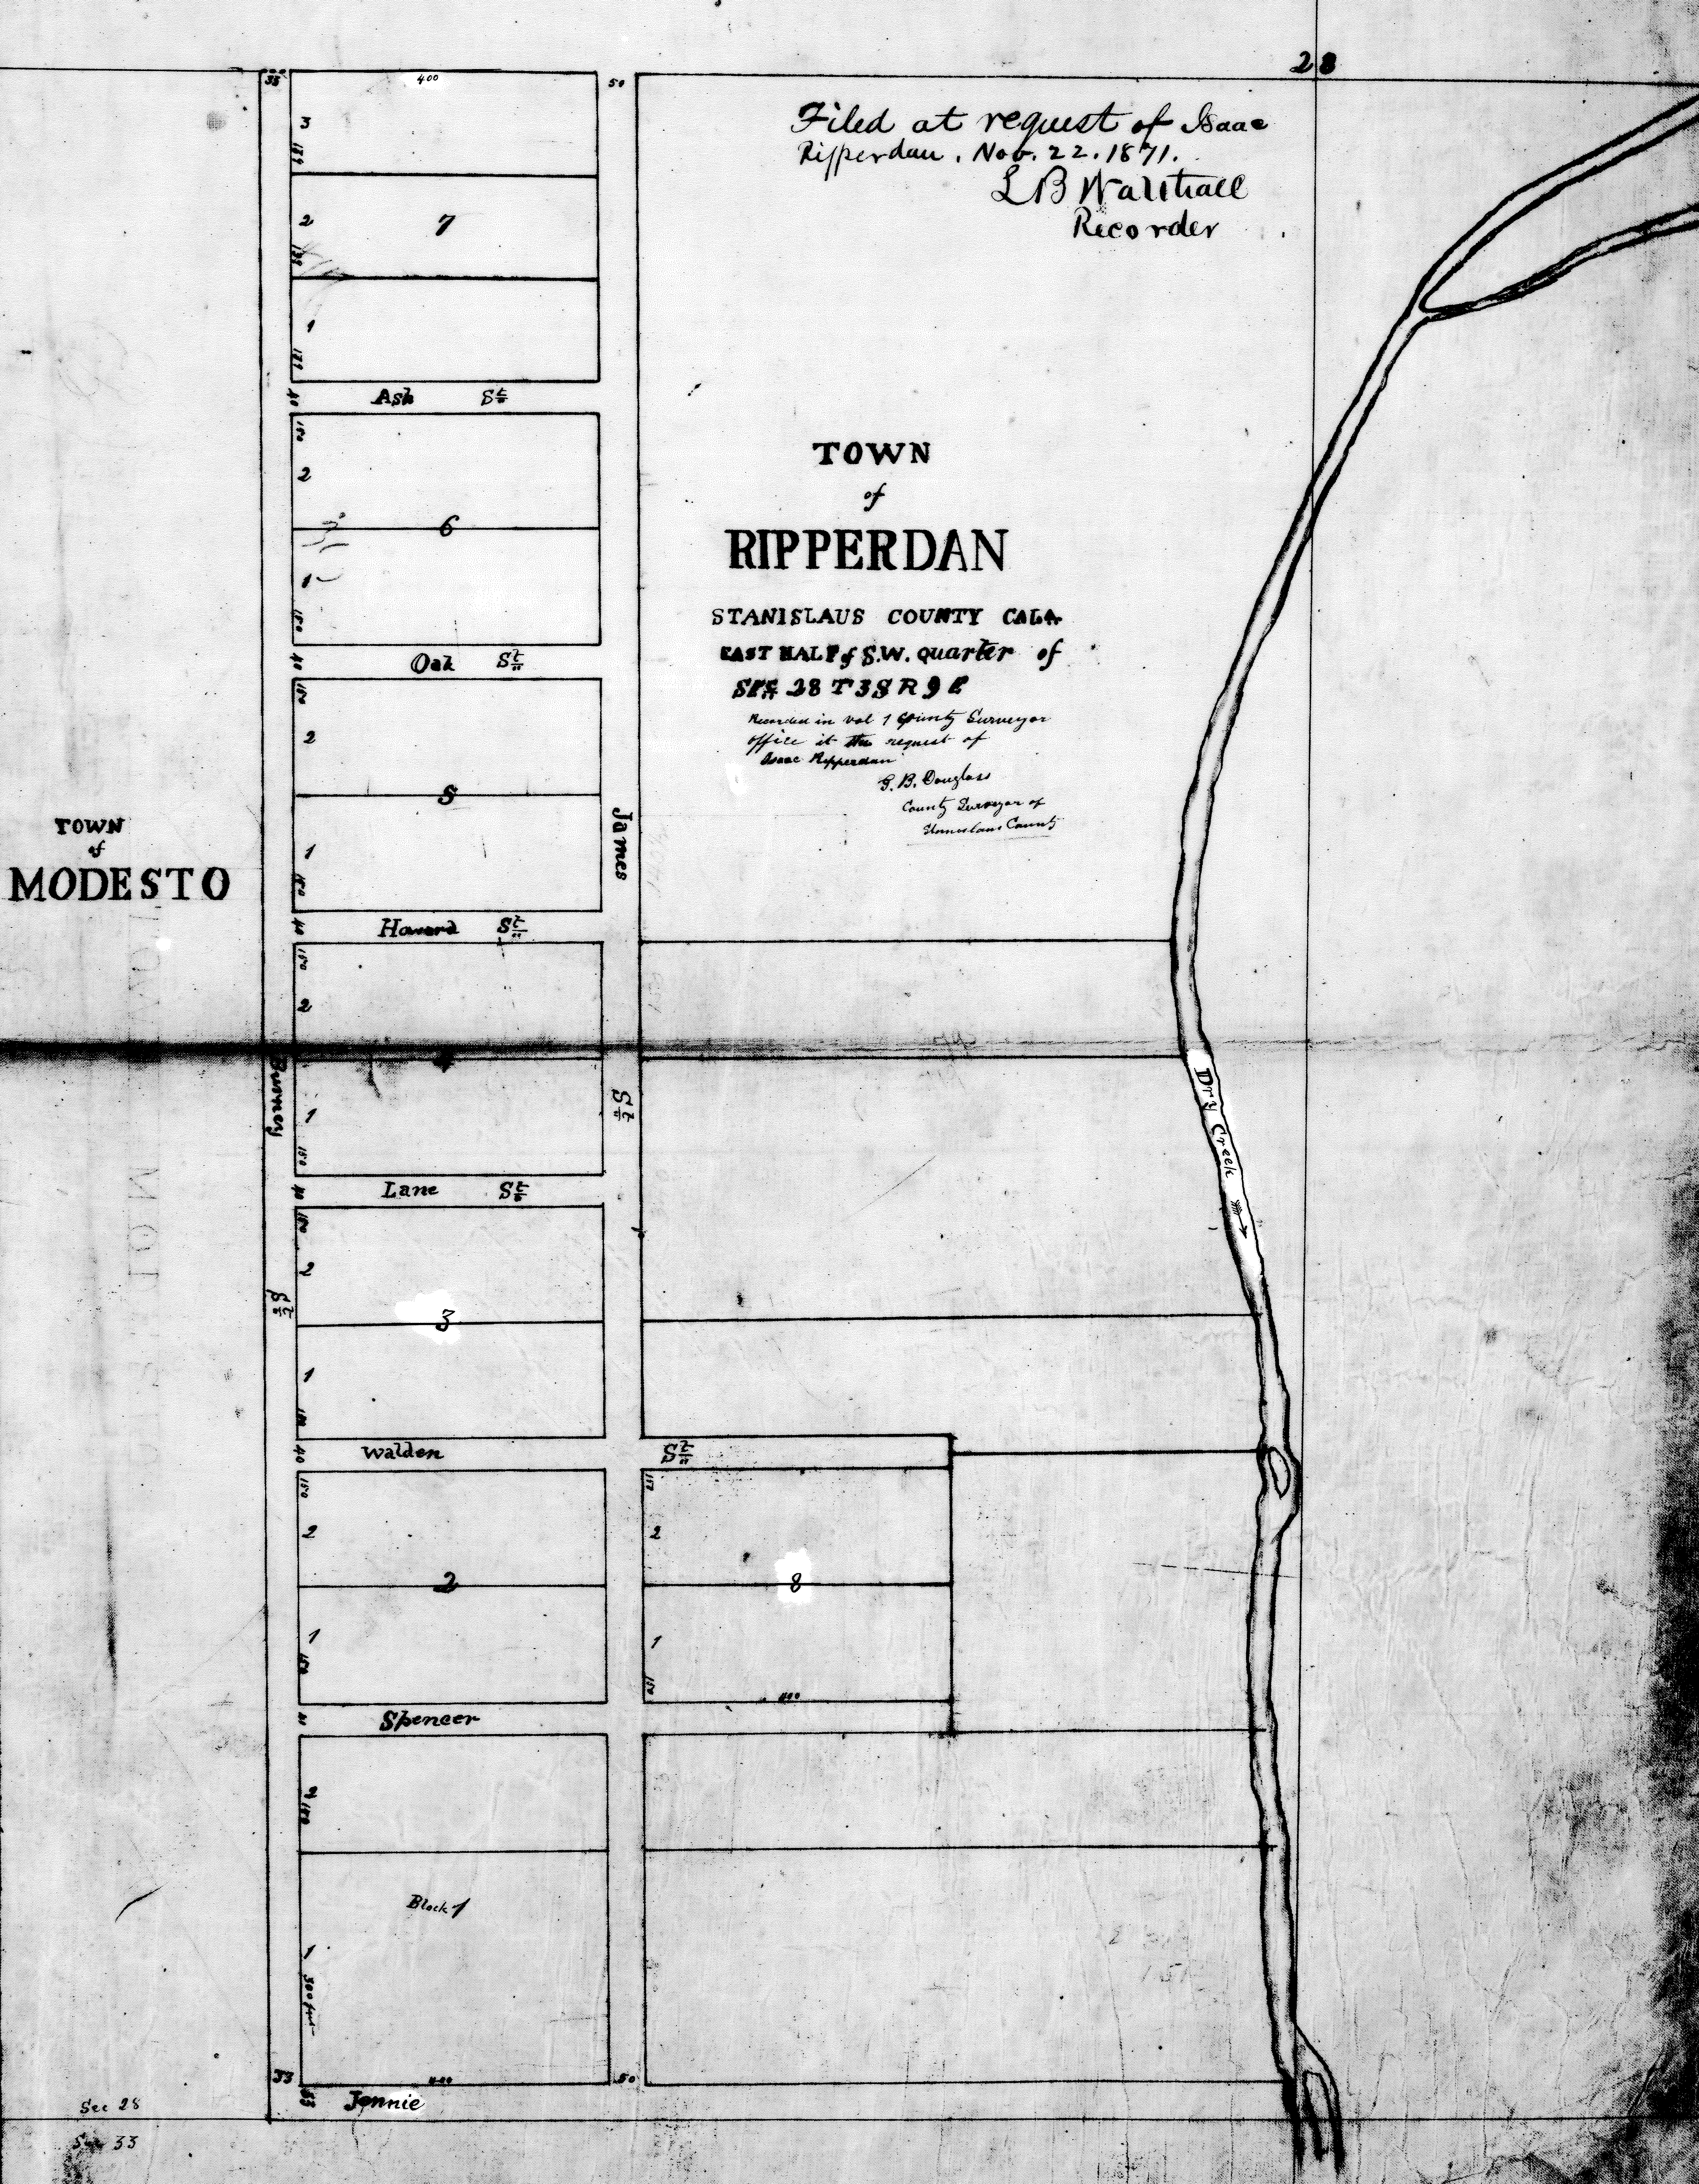 Ripperdan.png (5836 x 7500 Pixels, 2.86 MB) 1871 survey map of the Town of Ripperdan, California (Stanislaus County) [IMG]